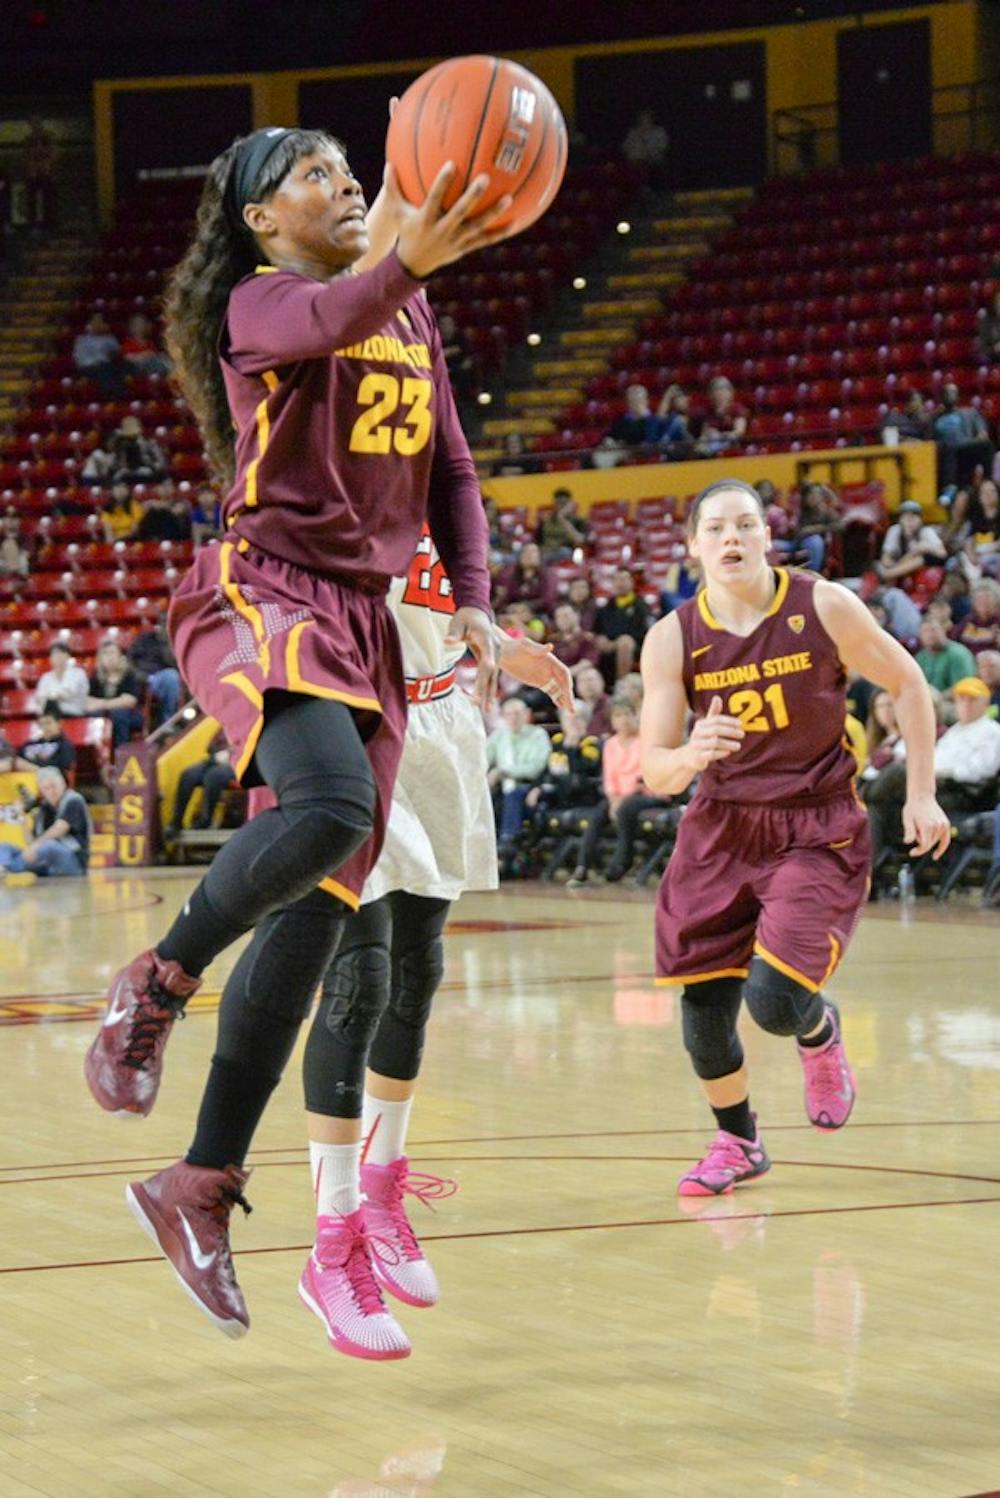 Junior Elisha Davis takes to the air for two points Friday night against Utah. The Sun Devils would go on to win the game 45-42 over the Utes on Feb. 27, 2015 at the Wells Fargo Arena in Tempe. (J. Bauer-Leffler/The State Press)